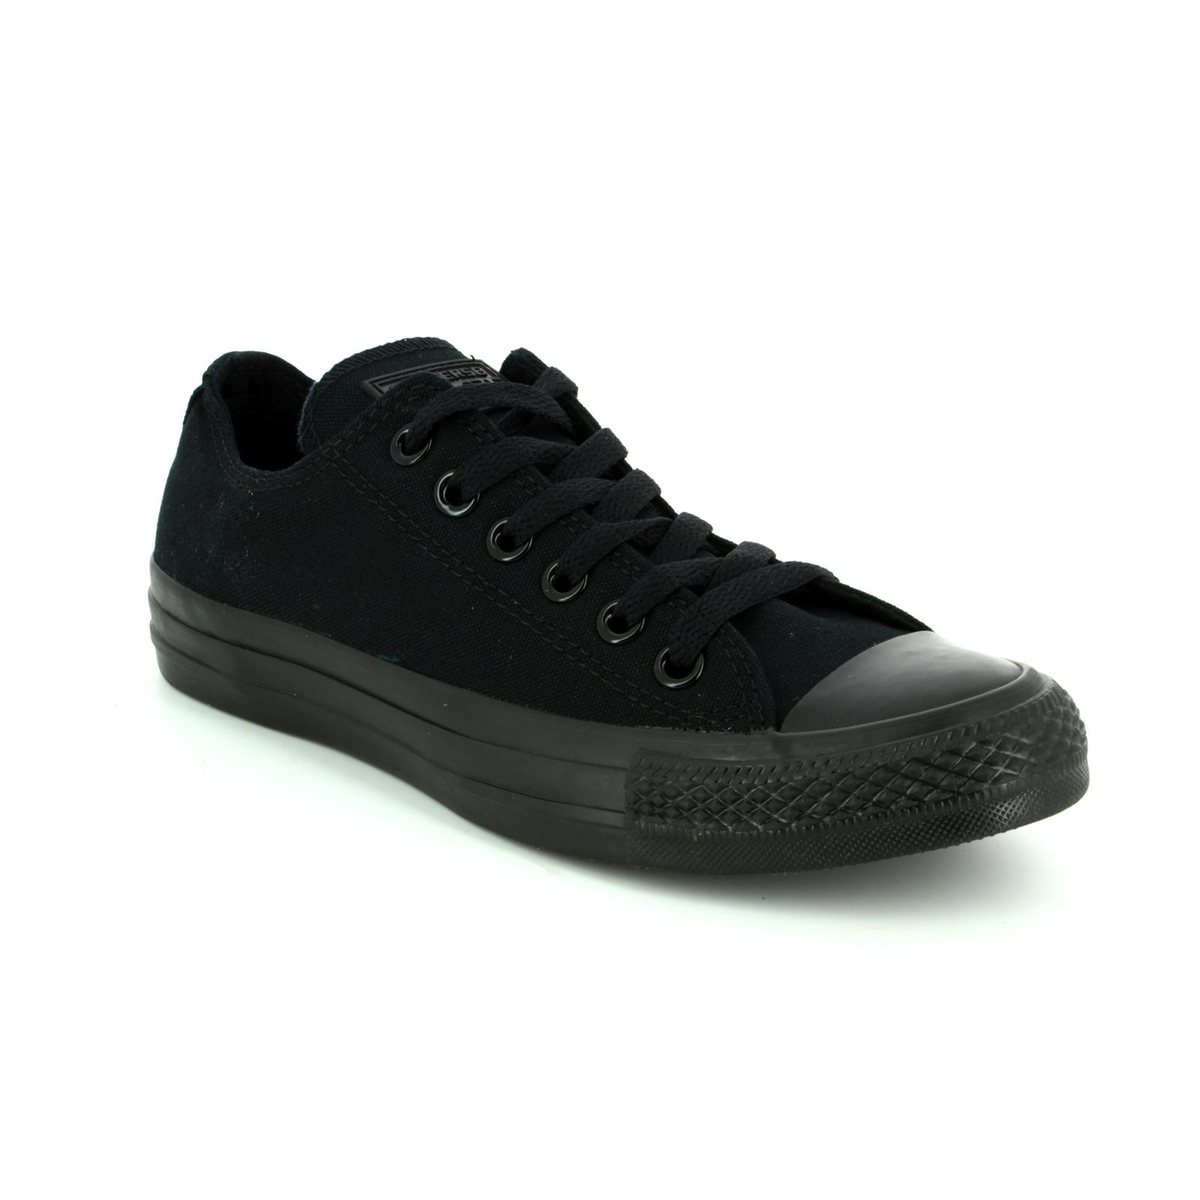 converse all star ox leather monochrome